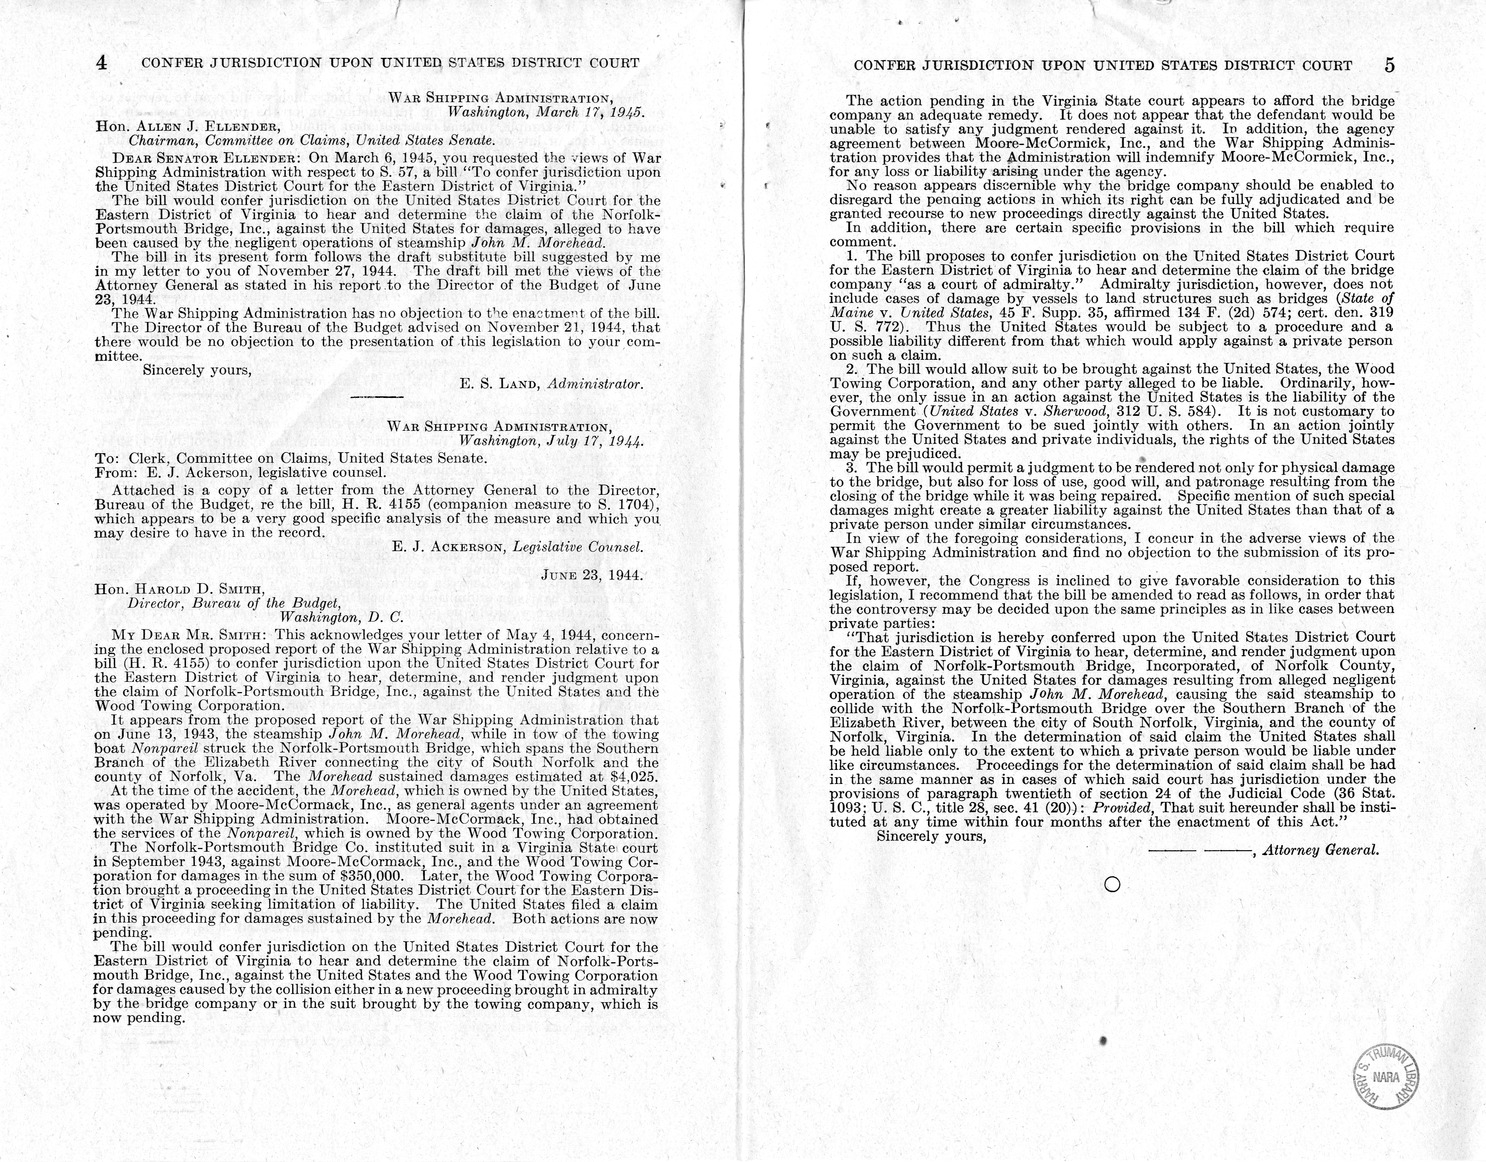 Memorandum from Harold D. Smith to M. C. Latta, H.R. 1599, To Confer Jurisdiction Upon the United States District Court for the Eastern District of Virginia to Hear, Determine, and Render Judgement Upon the Claim of Norfolk-Portsmouth Bridge, Incorporated